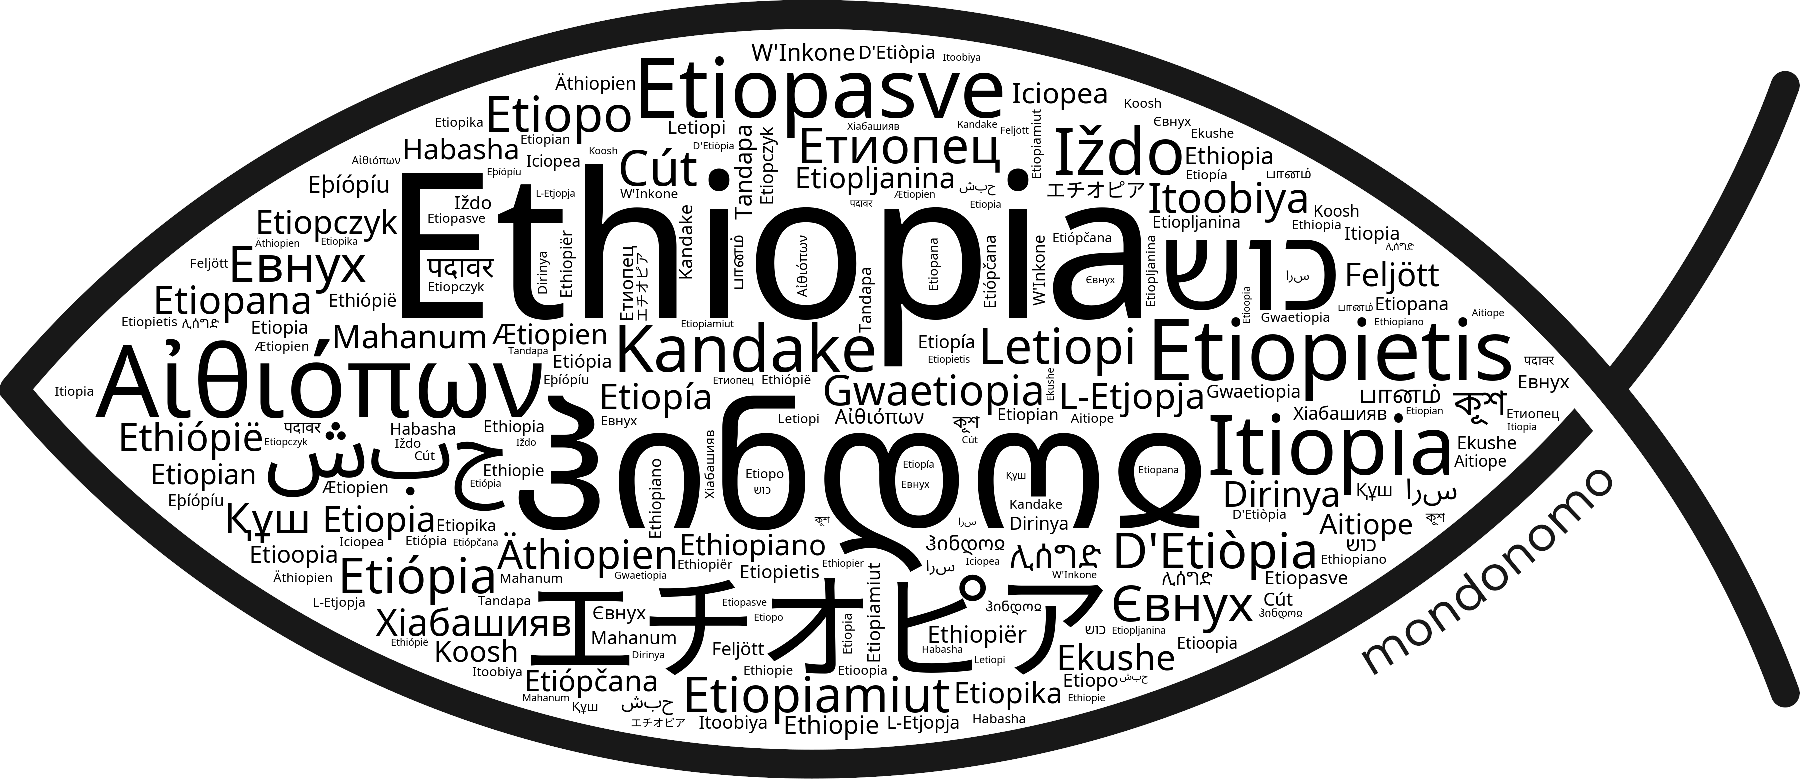 Name Ethiopia in the world's Bibles